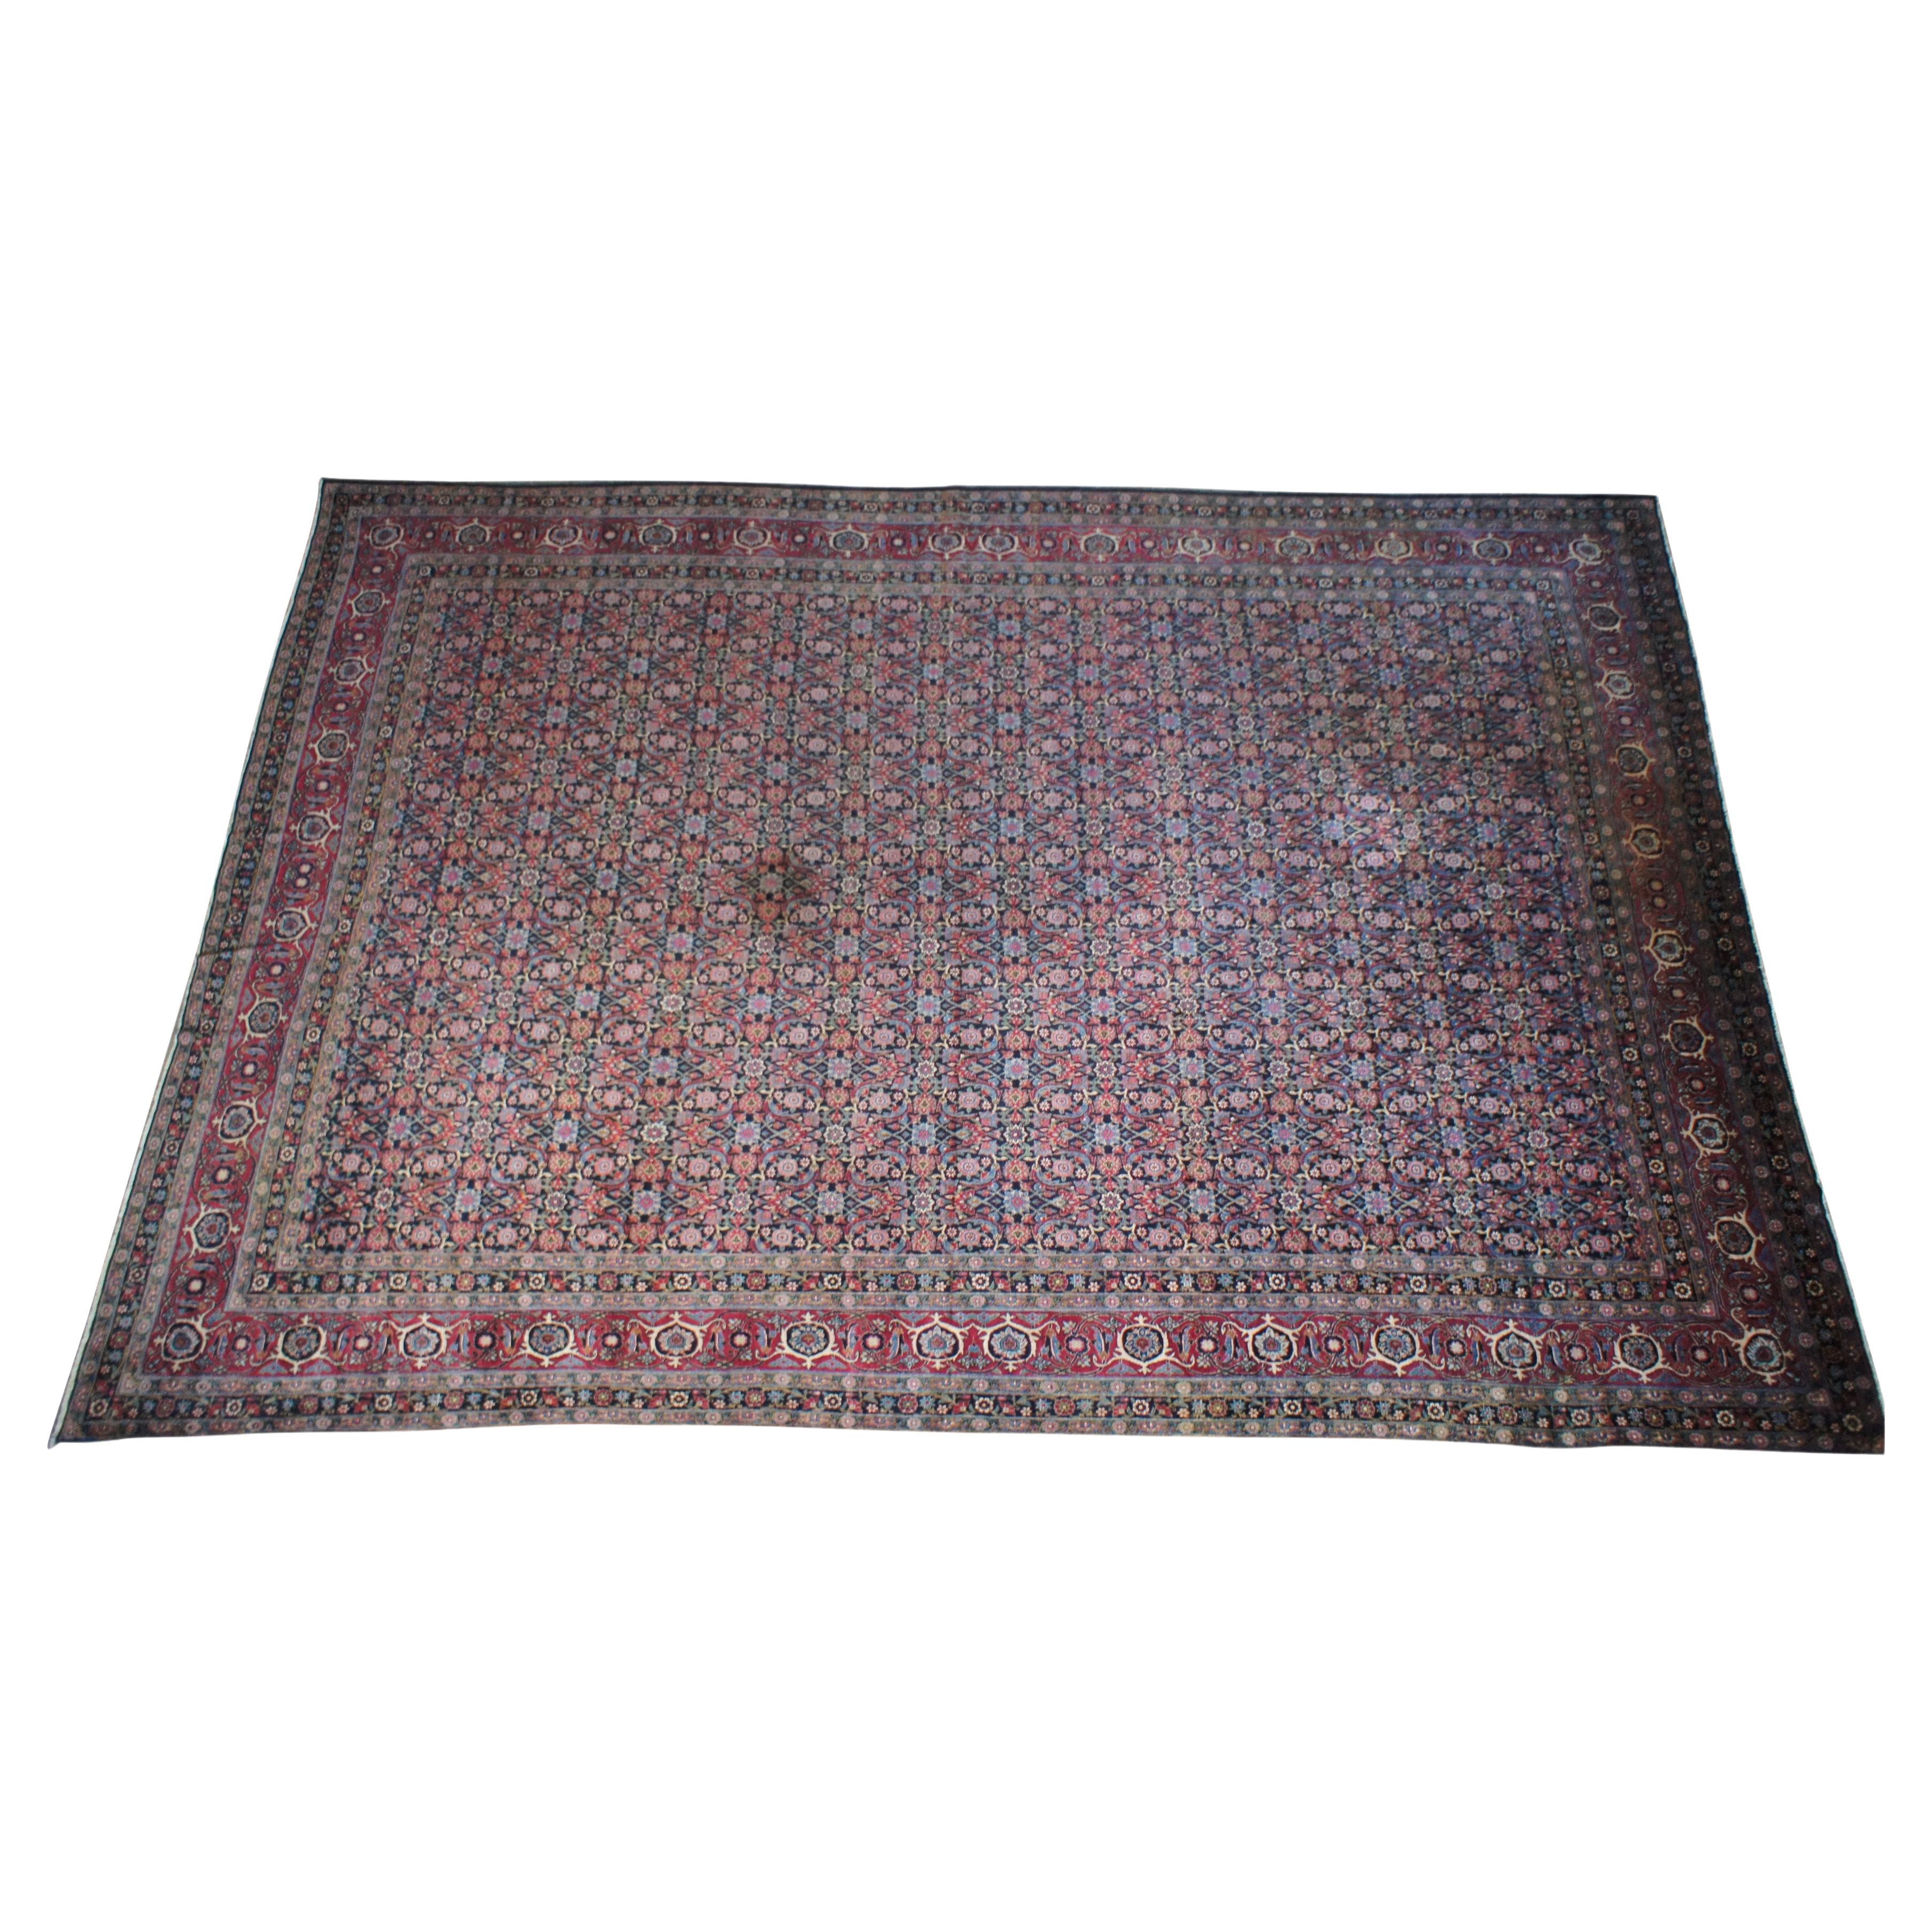 Antique Silk Wool Tabriz Persian Hand Knotted Geometric Bokhara Palace Rug For Sale